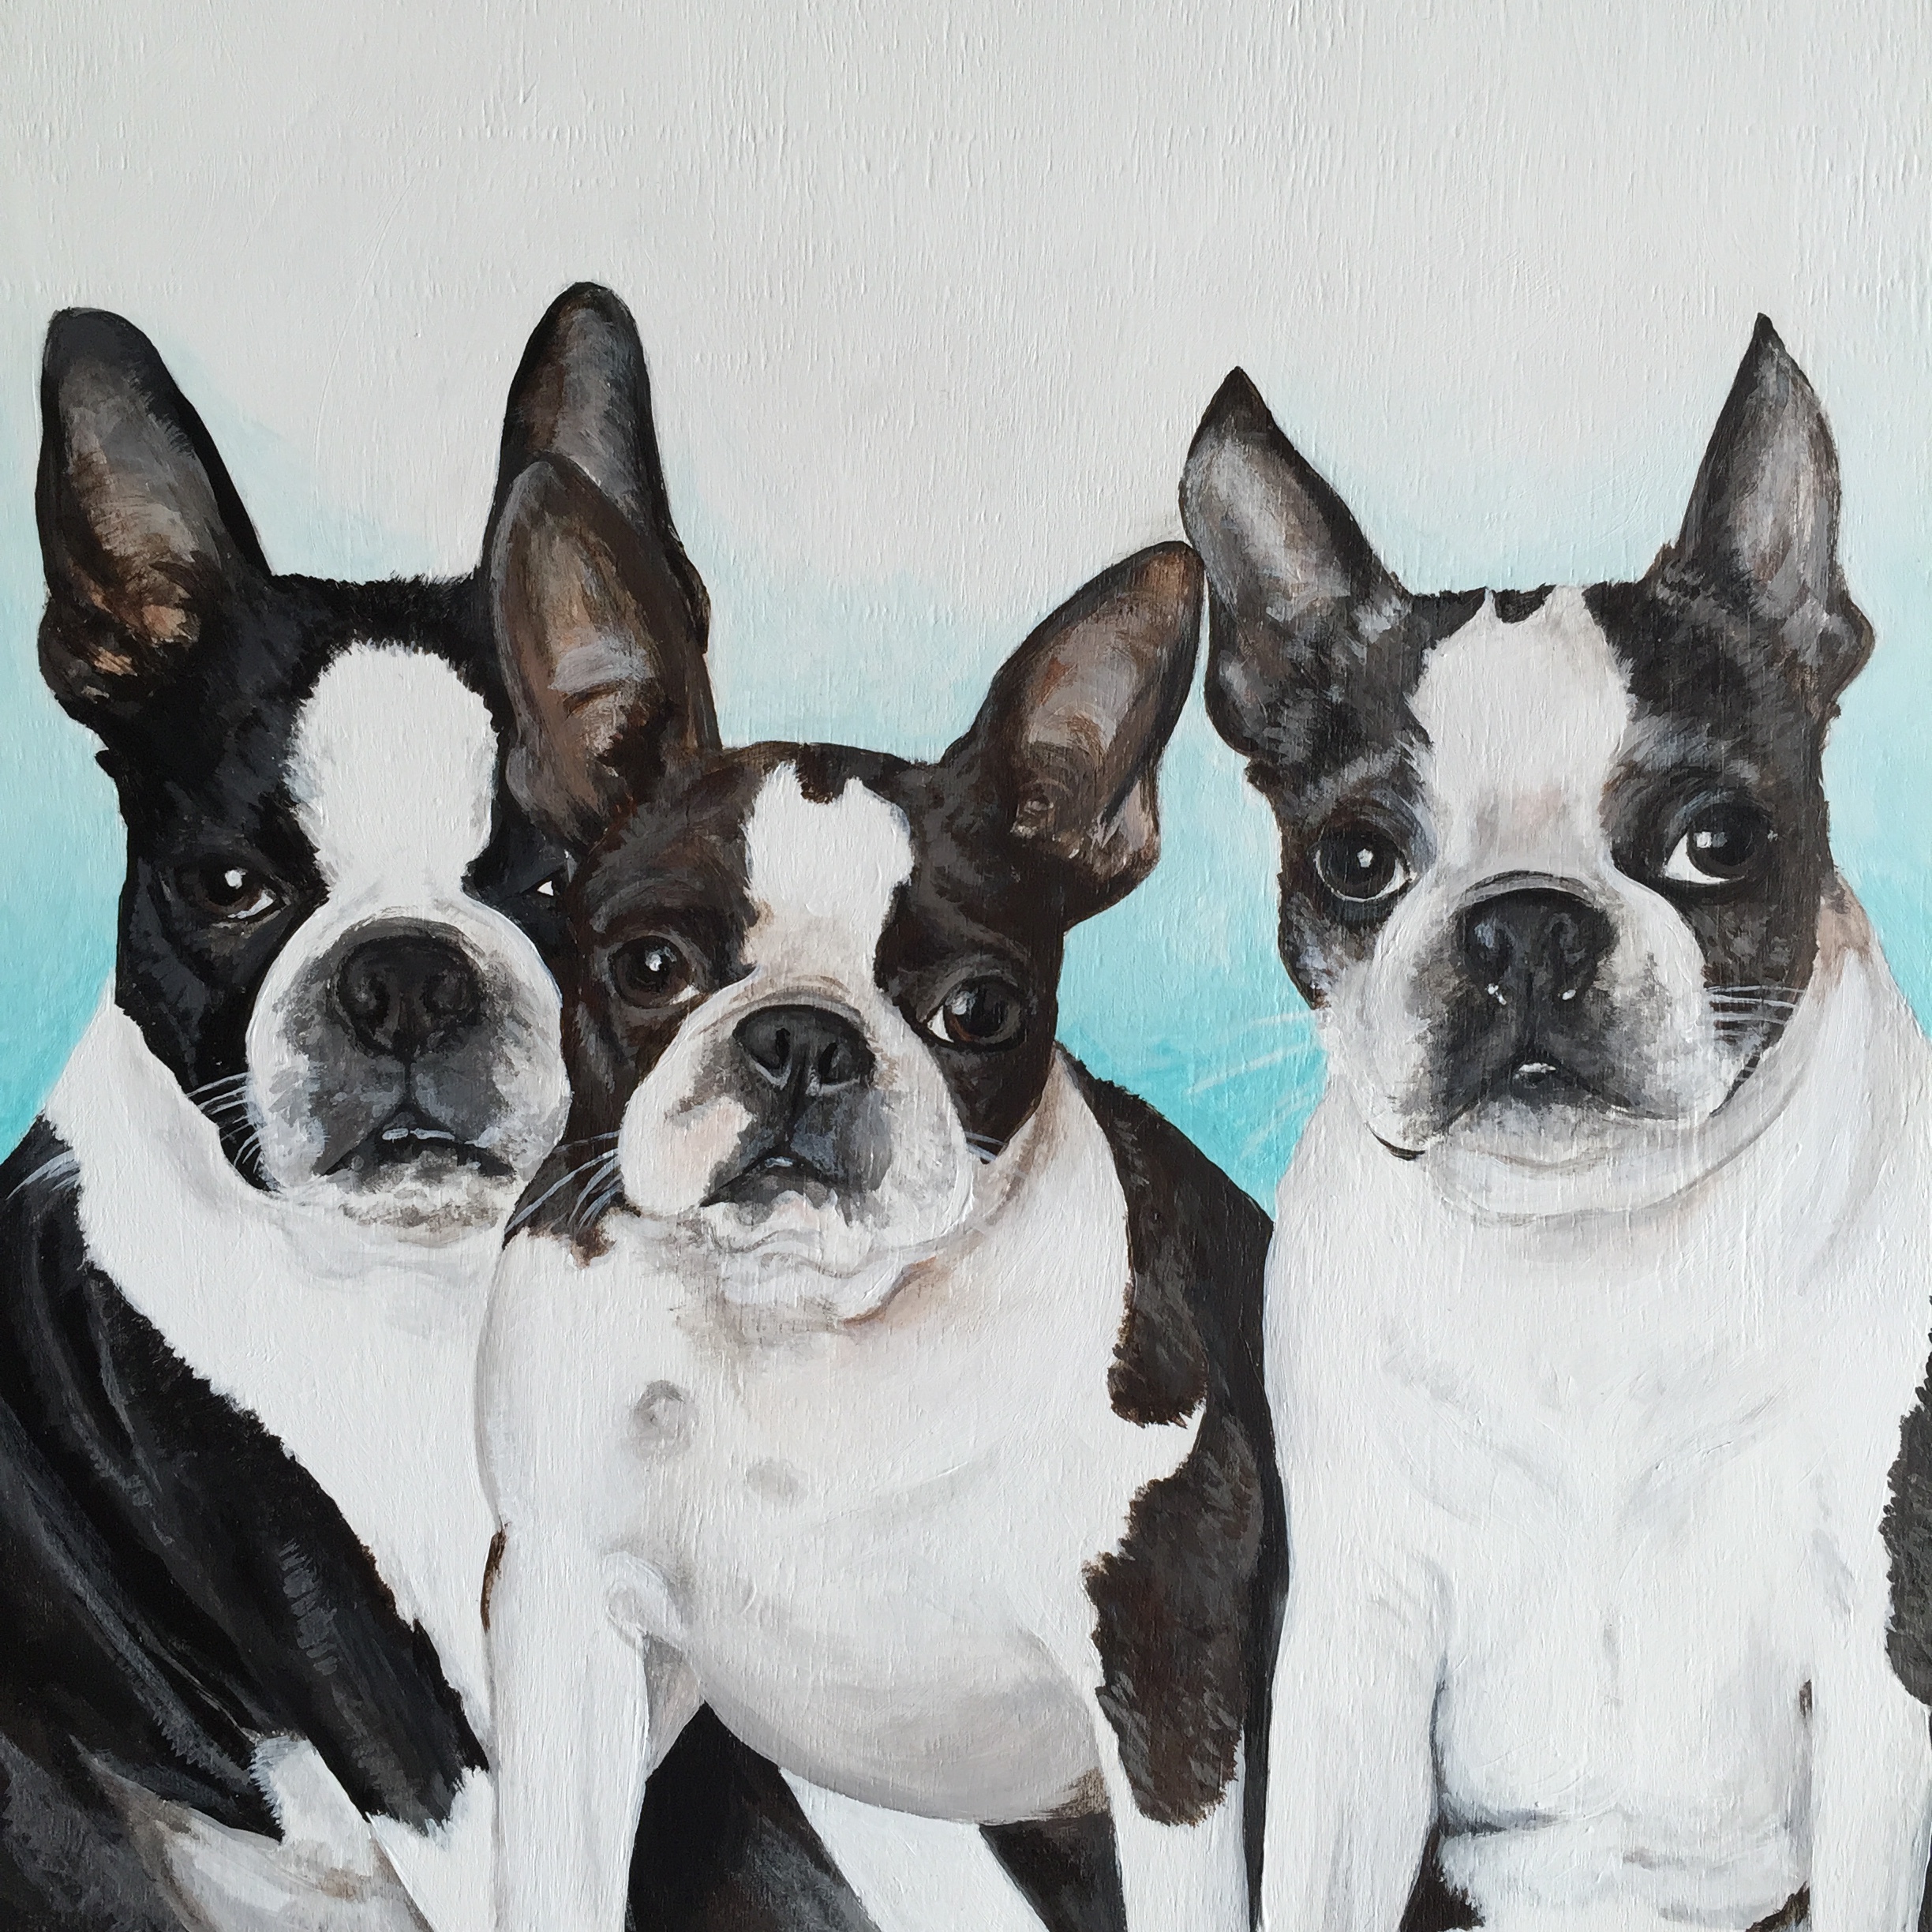  Memo, Frances, and Skylar - Boston Terriers painted for Chandra @ohmydoggies 